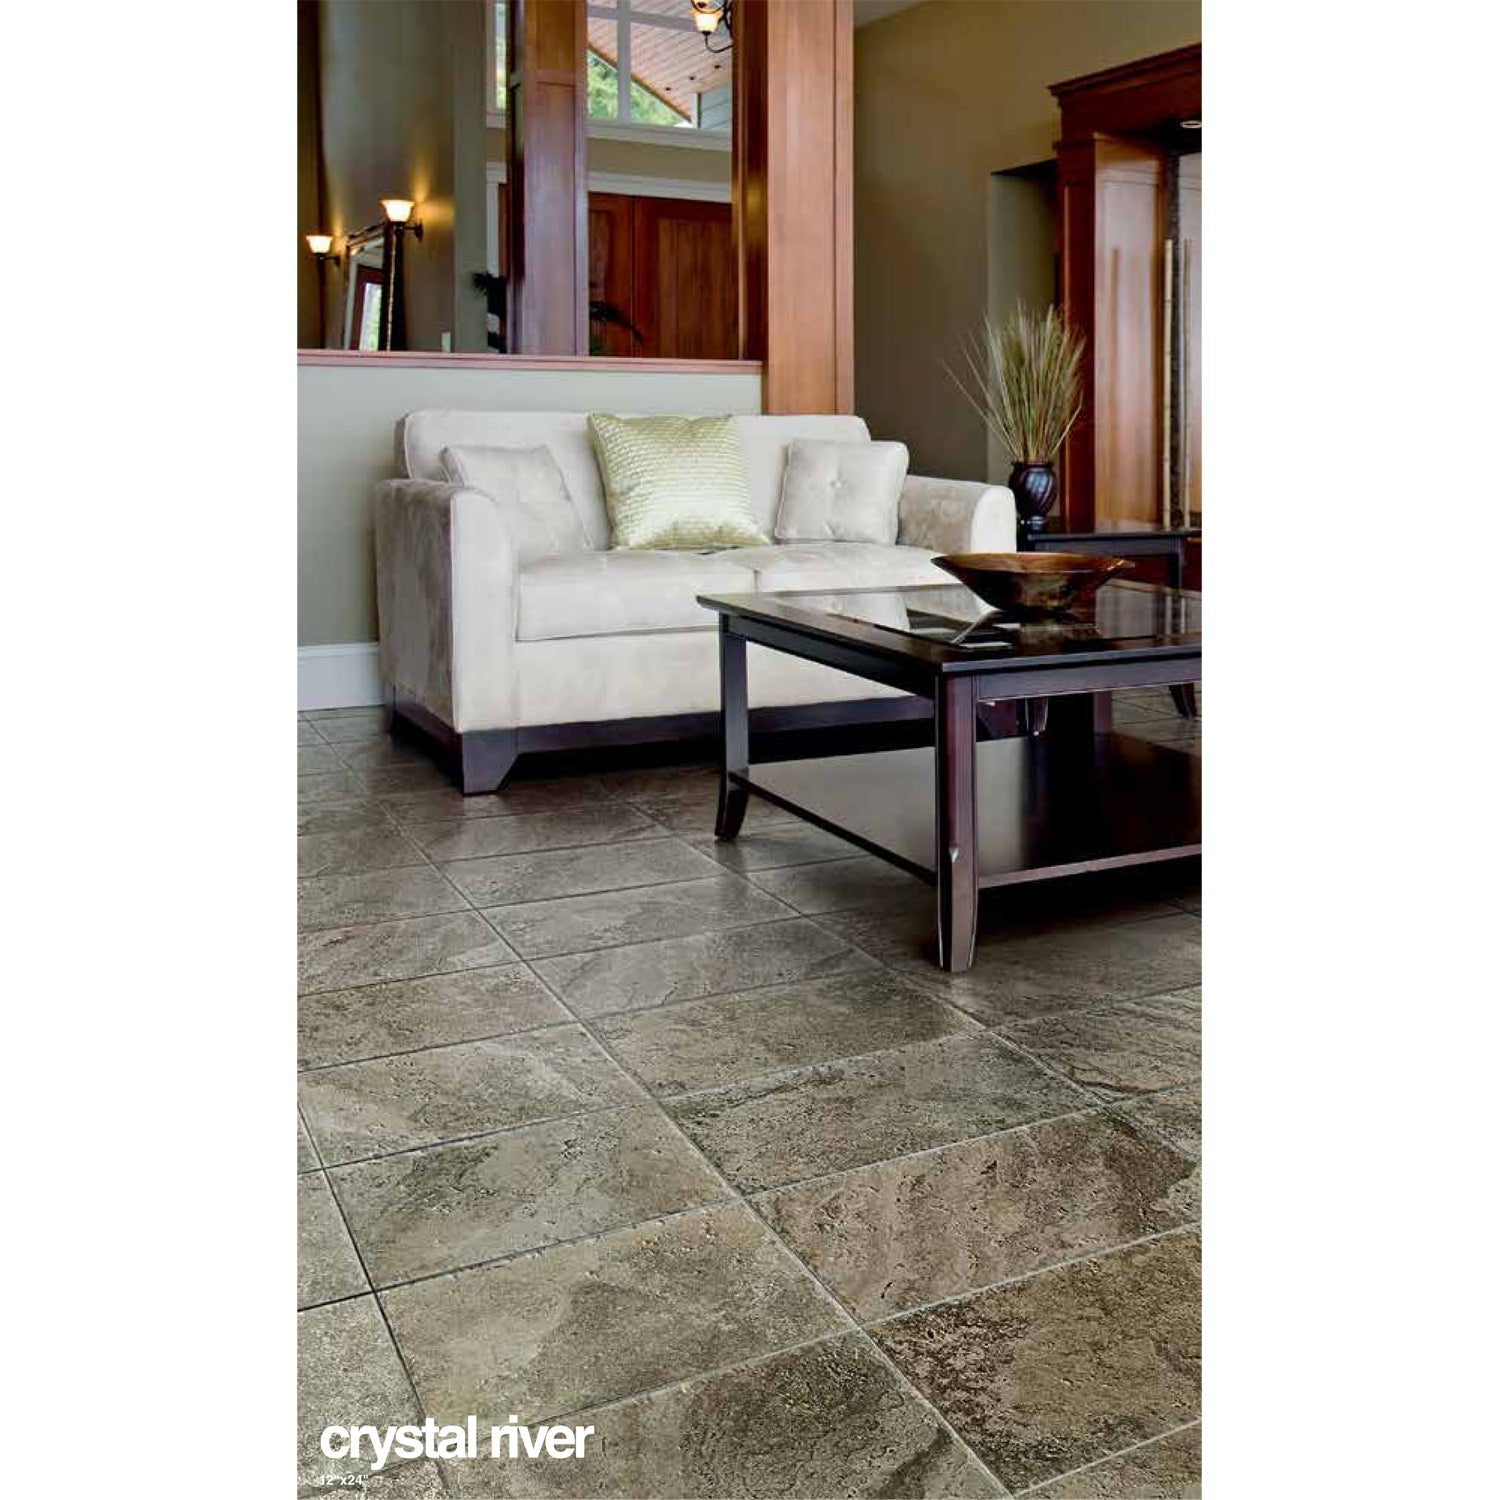 Marazzi - Archaeology 12 in. x 24 in. Porcelain Stoneware - Crystal River